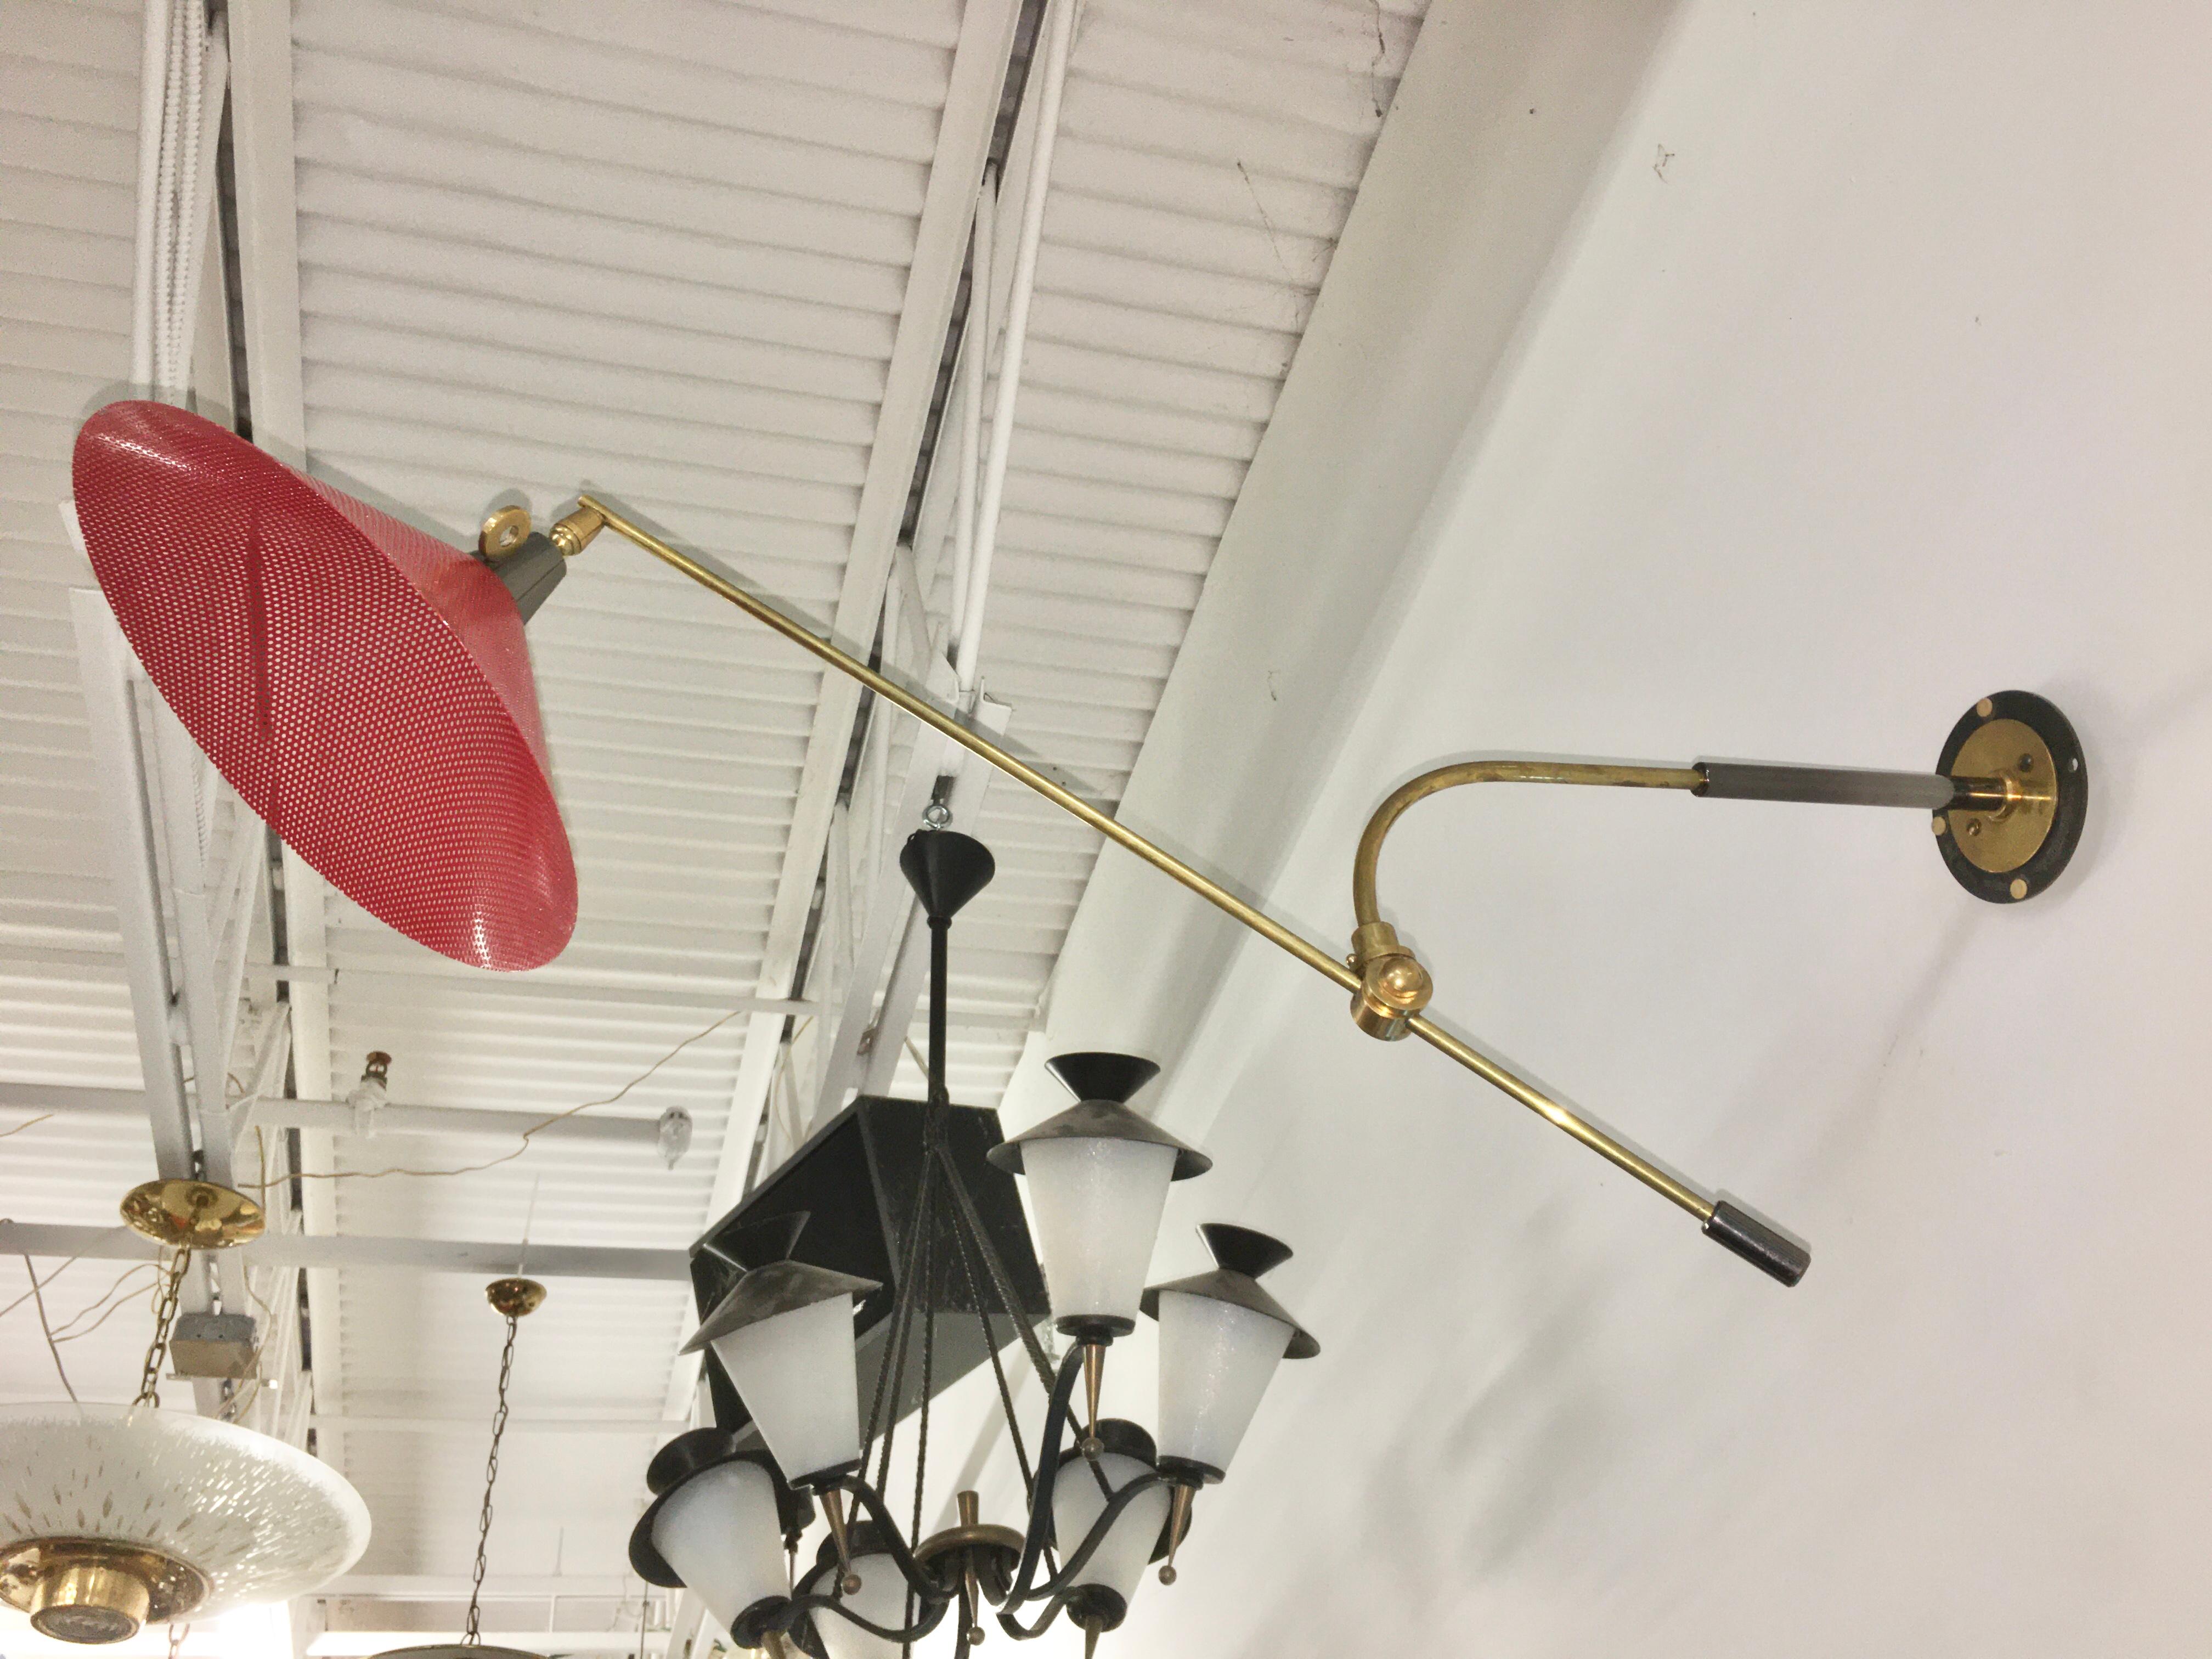 Rare French 1950's swing arm wall lamp with red enameled perforated metal shade, gunmetal fittings and solid brass structure.  Can be positioned with L shaped wall bracket facing up or down.
Rewired for USA. Takes a single candelabra size bulb up to